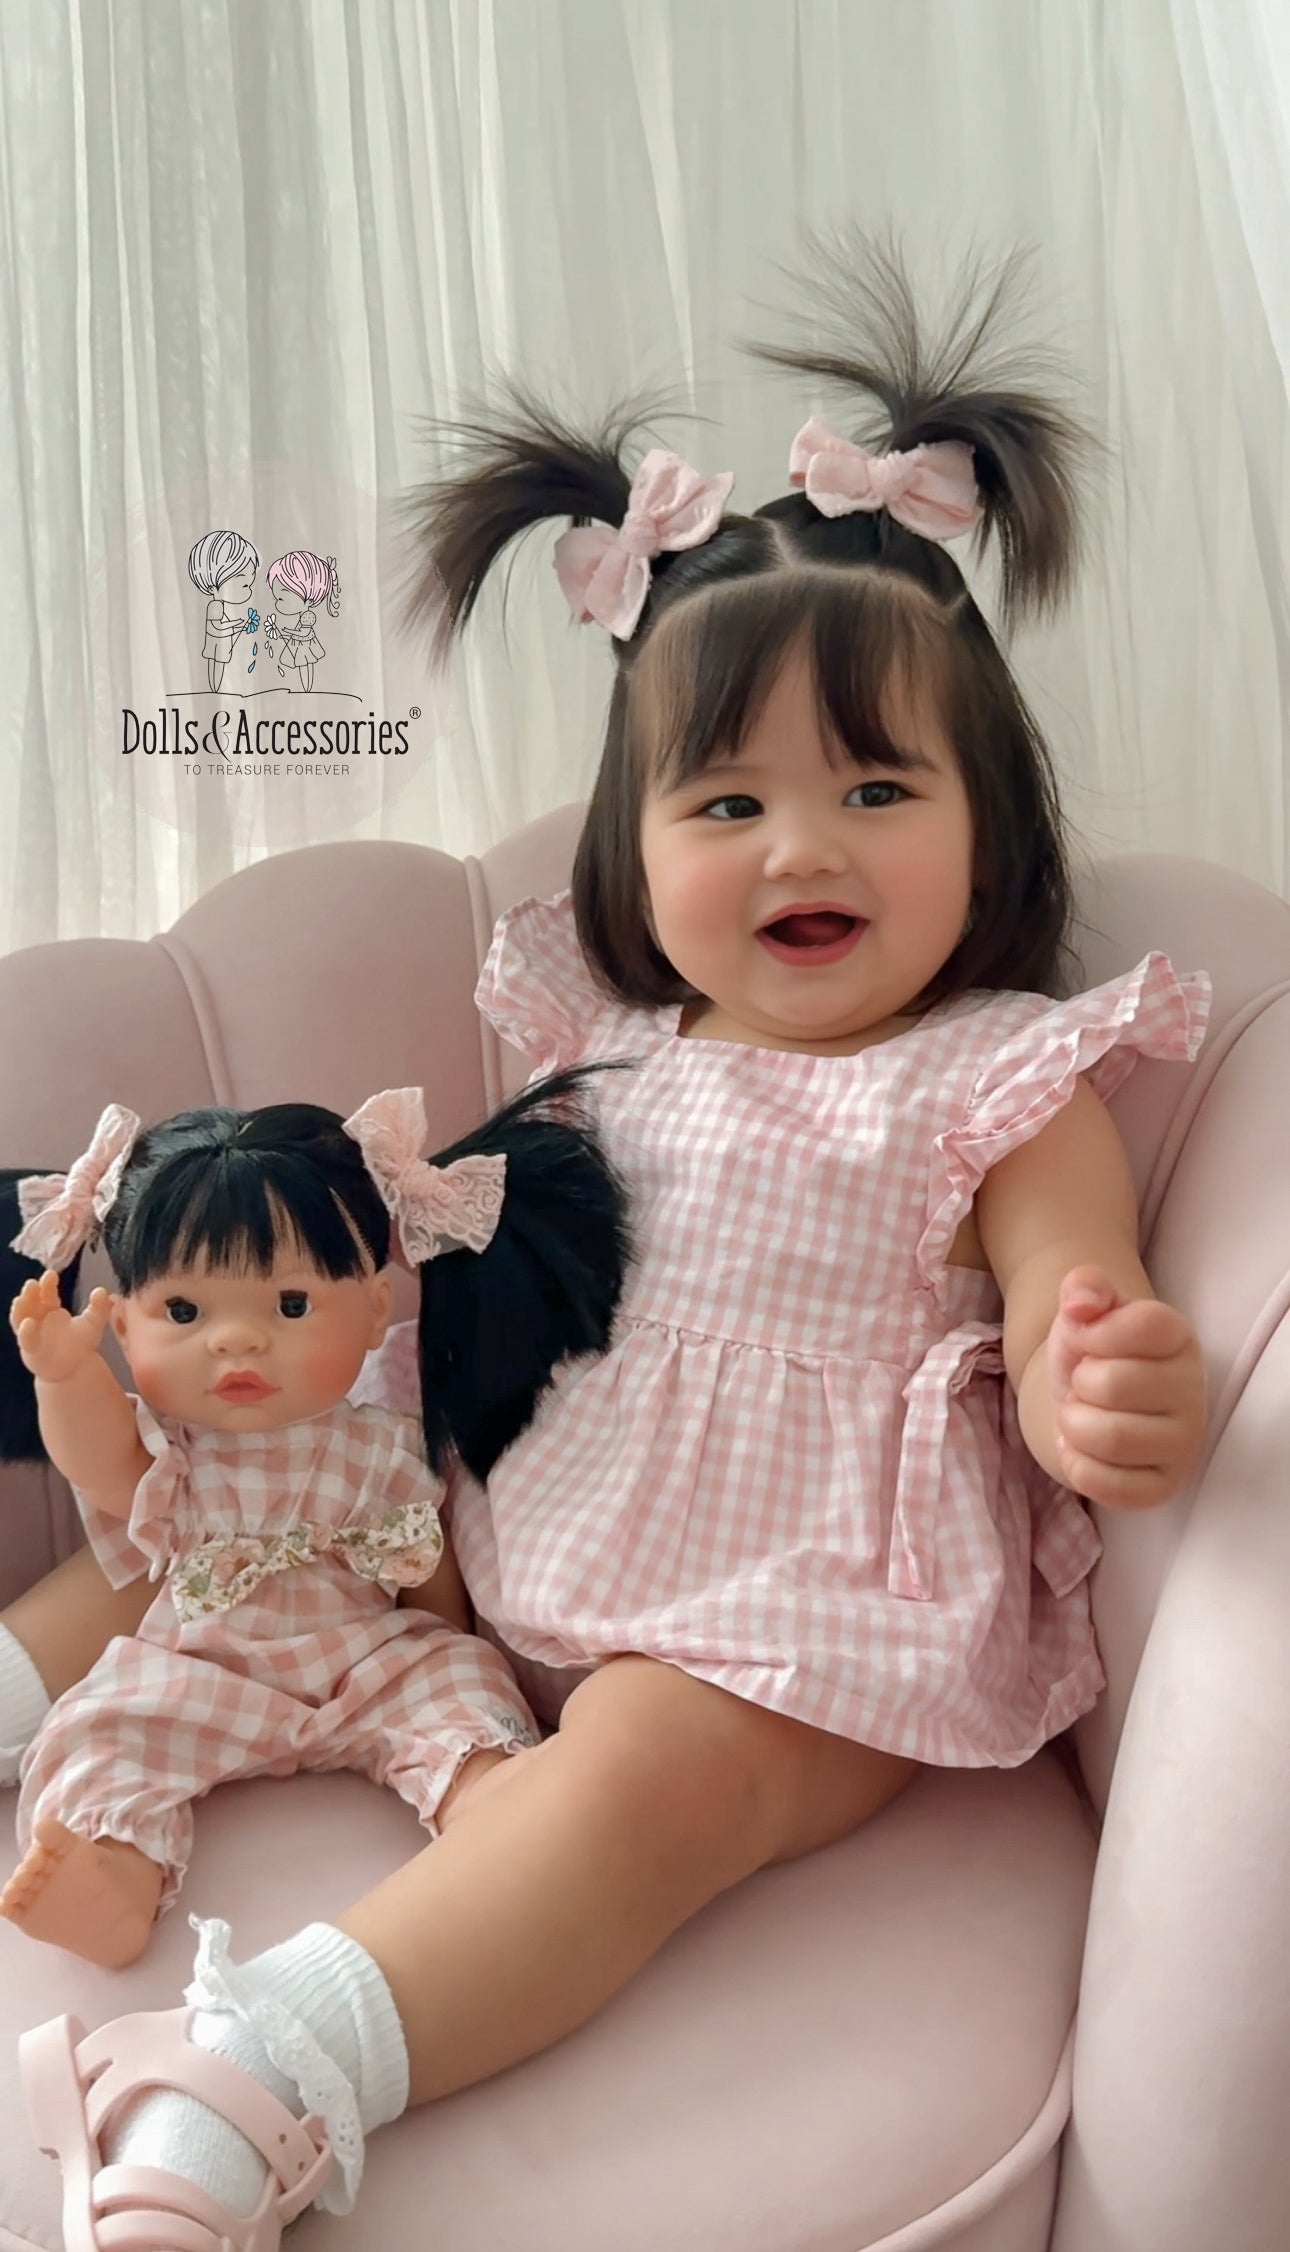 Handmade Collectible Joy Collection Baby Doll (3020) by Nines D&